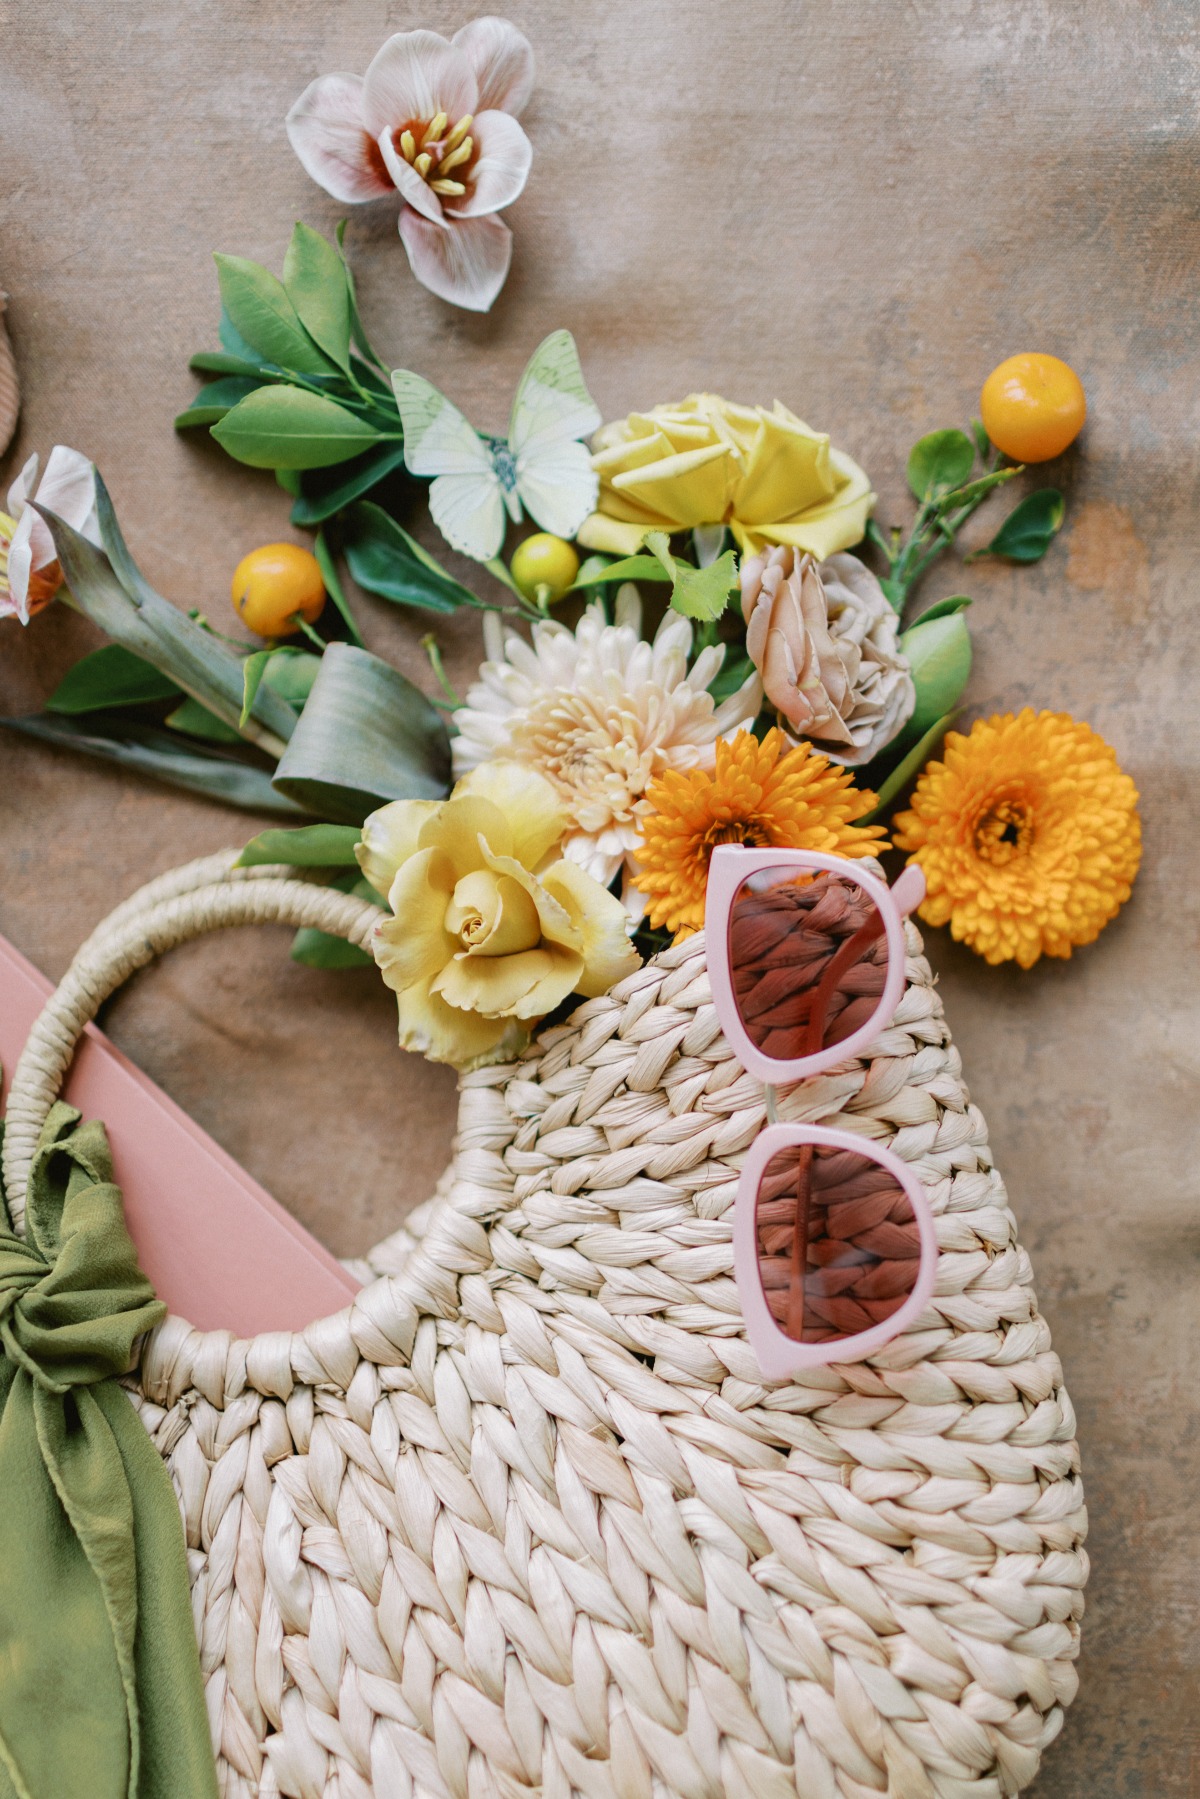 Aerial view of rattan handbag, pink sunglasses, and flowers with butterflies